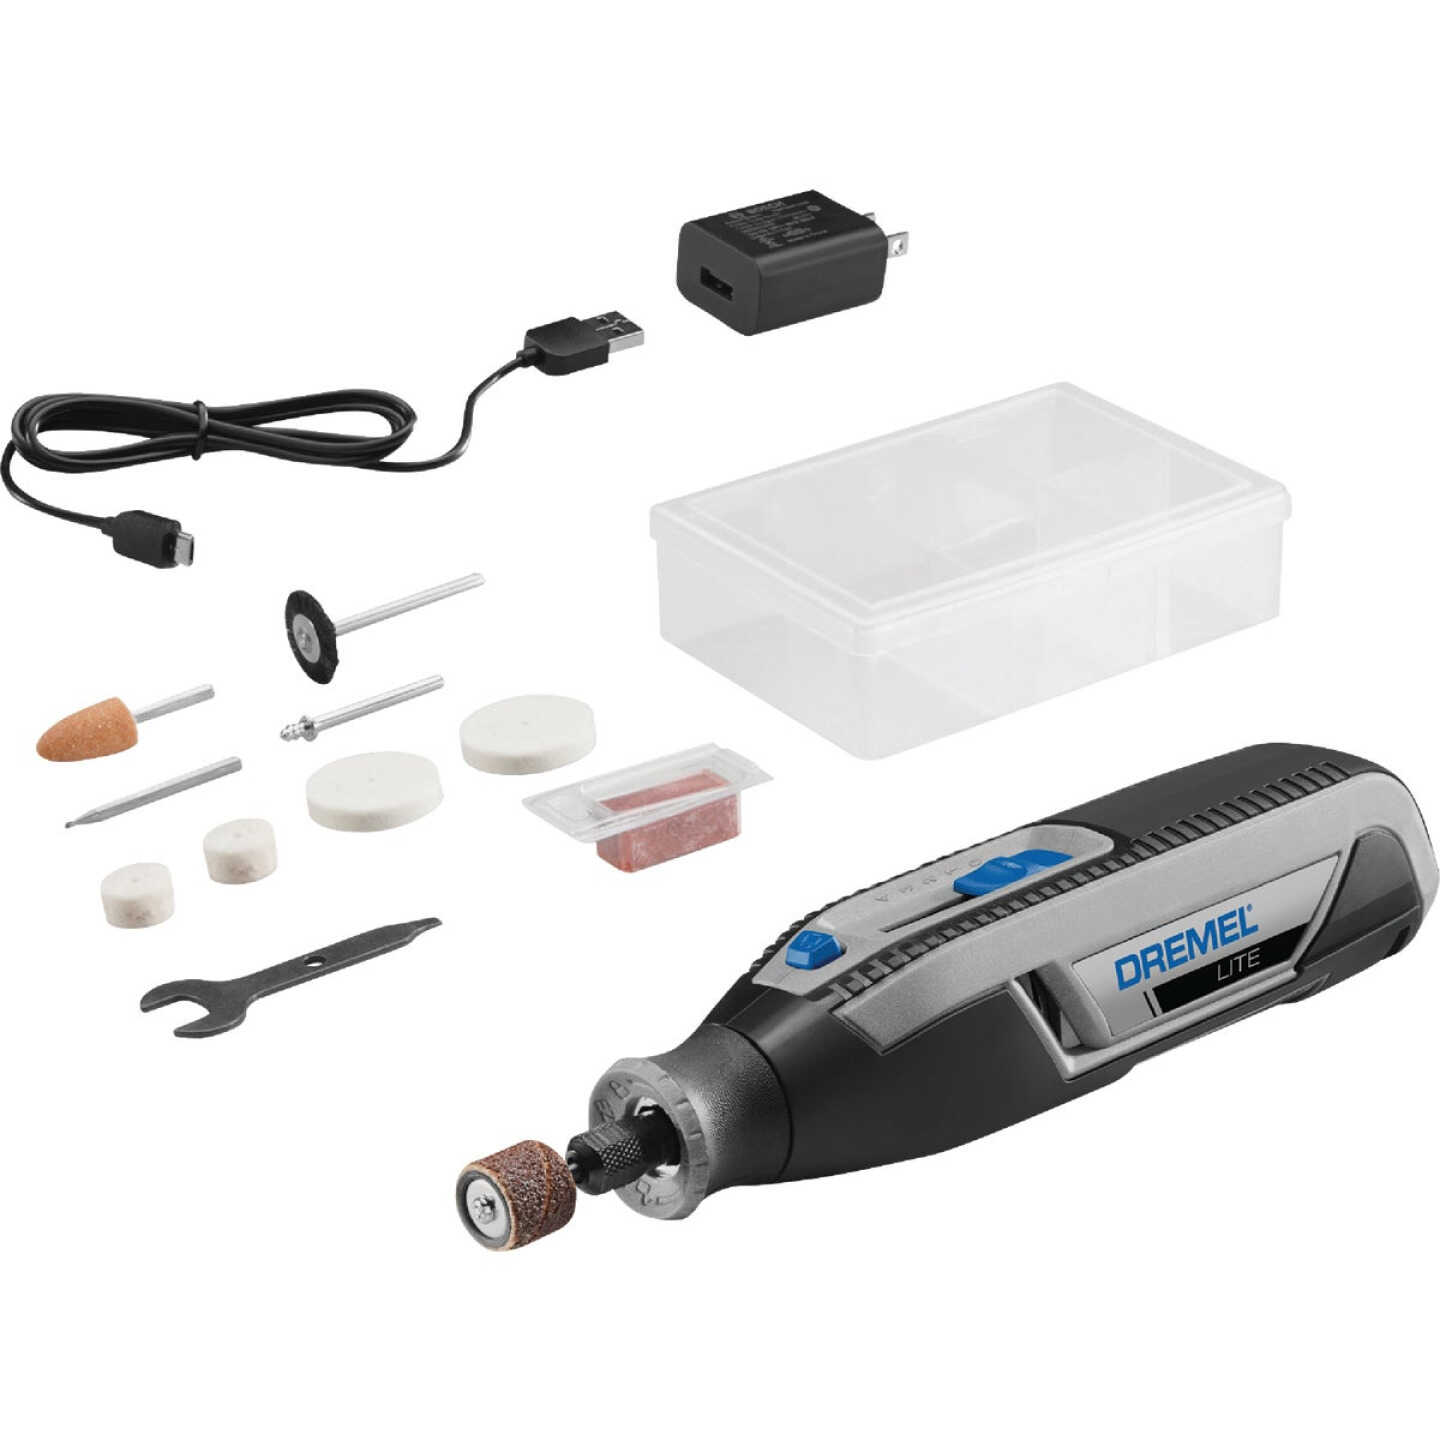 Dremel Lite 3.6 Volt Lithium-Ion Variable Speed Cordless Rotary Tool Kit -  Town Hardware & General Store